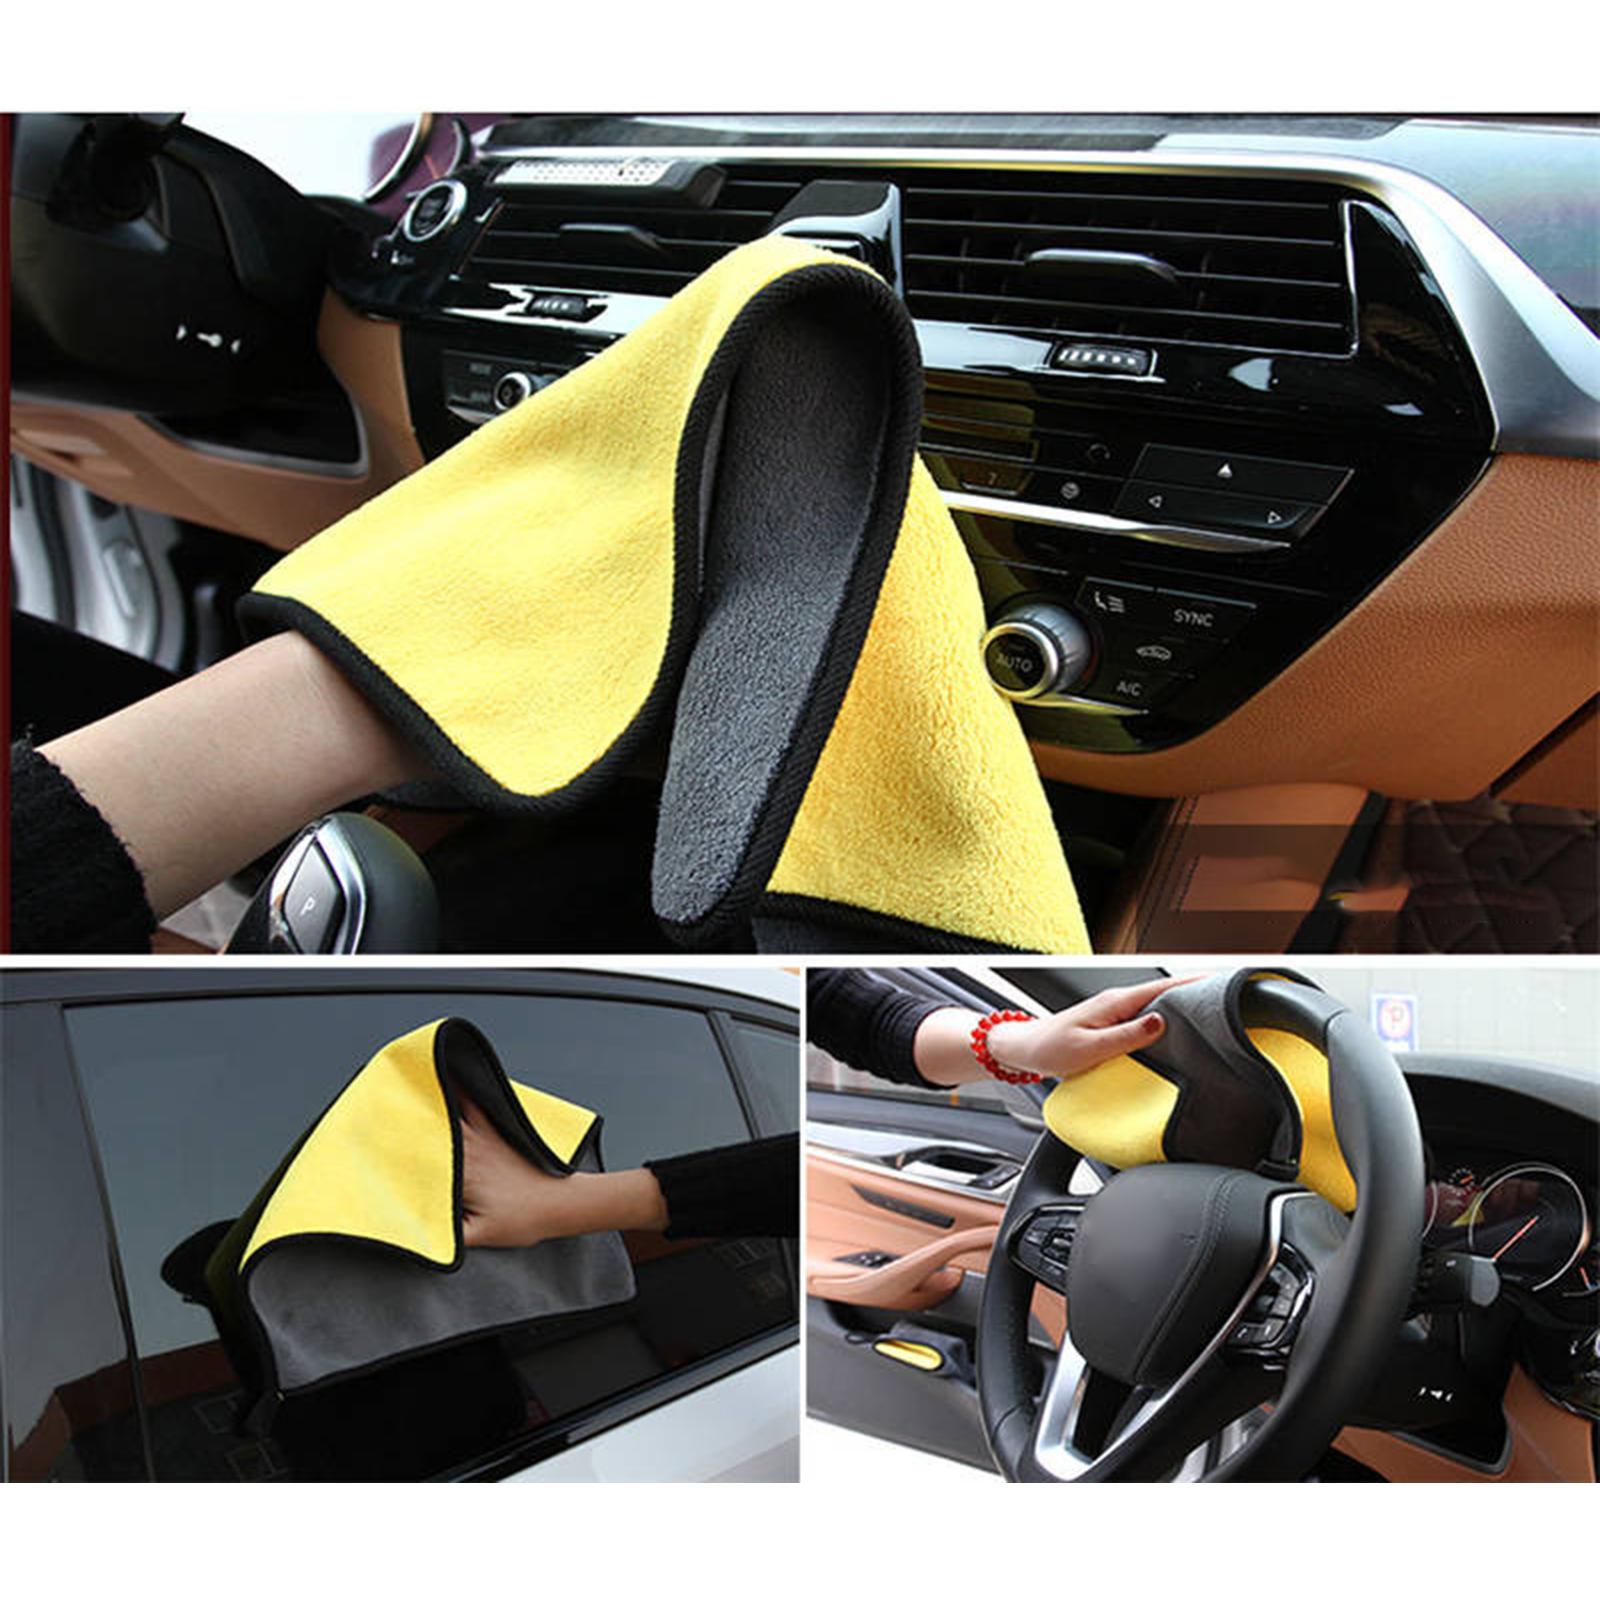 2 Pieces Car Microfiber Cleaning Towel Household Cleaning Car Wash 30cmx30cm